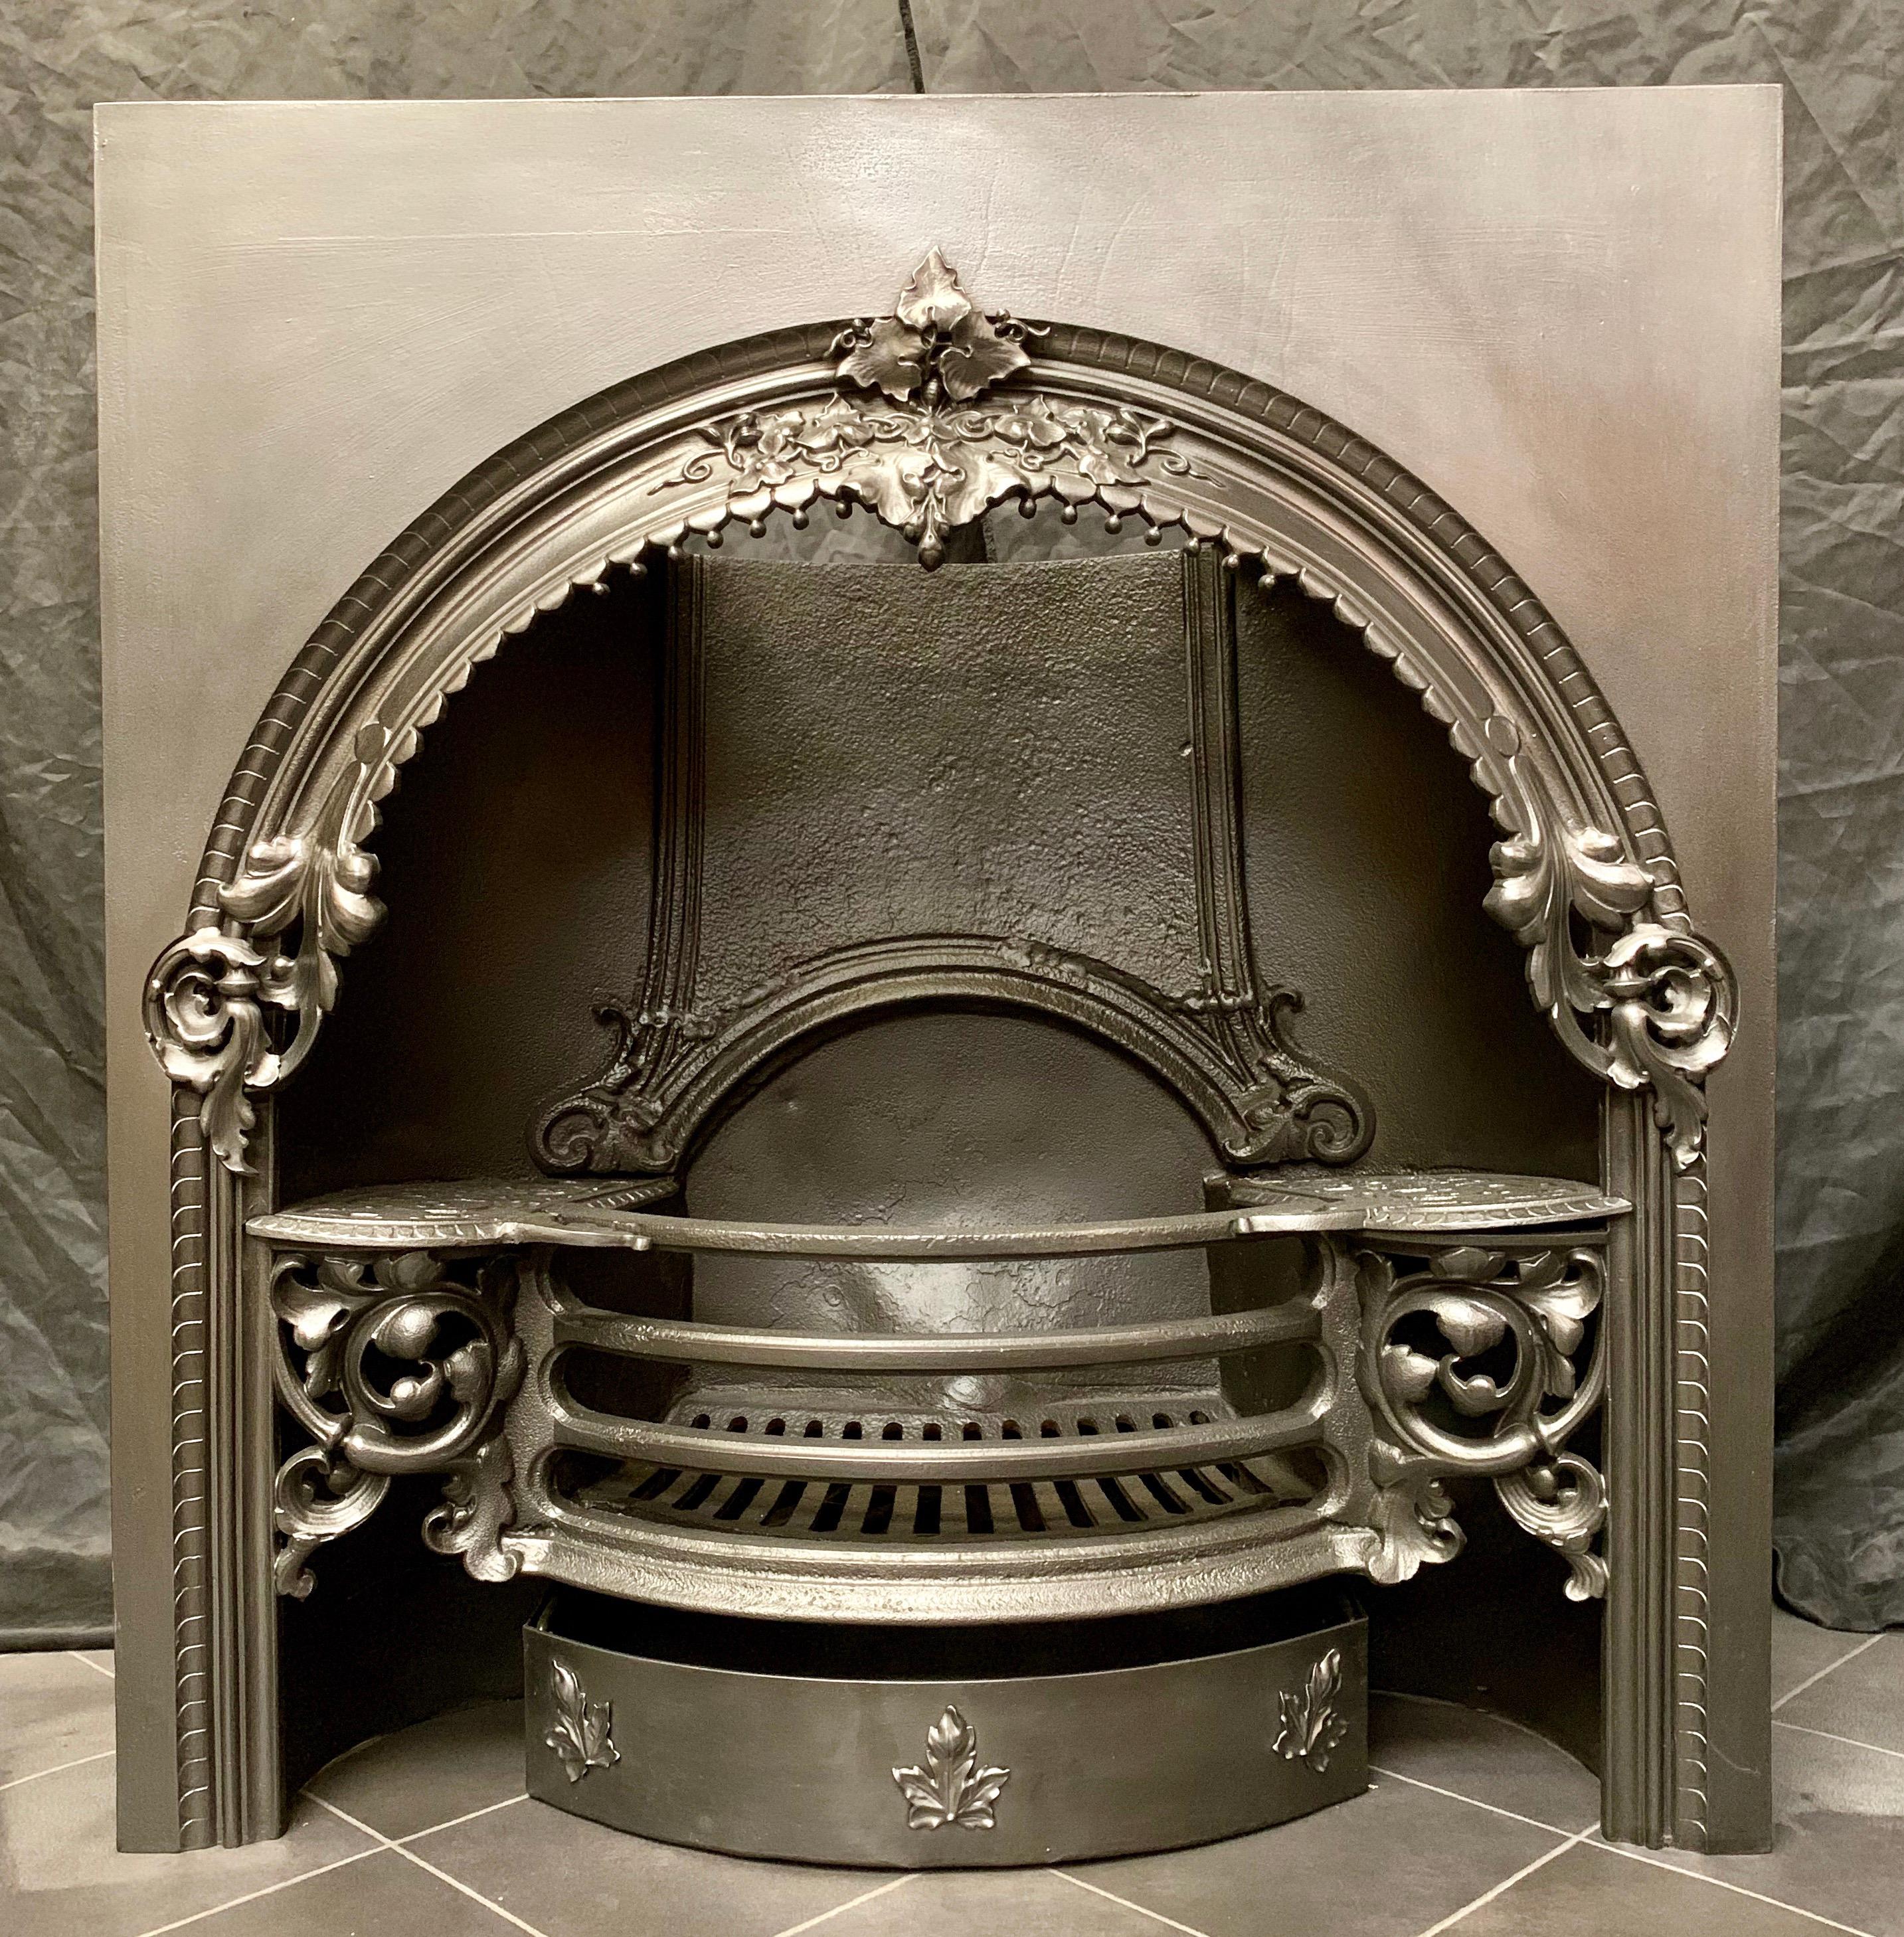 A large and ornate 19th century mid Victorian cast iron register fireplace insert in the Rococo manor, a large protruding sweeping arch with a highly decorated central cluster of leaf's and tendrils, a four bar fire grate, is flanked by further high